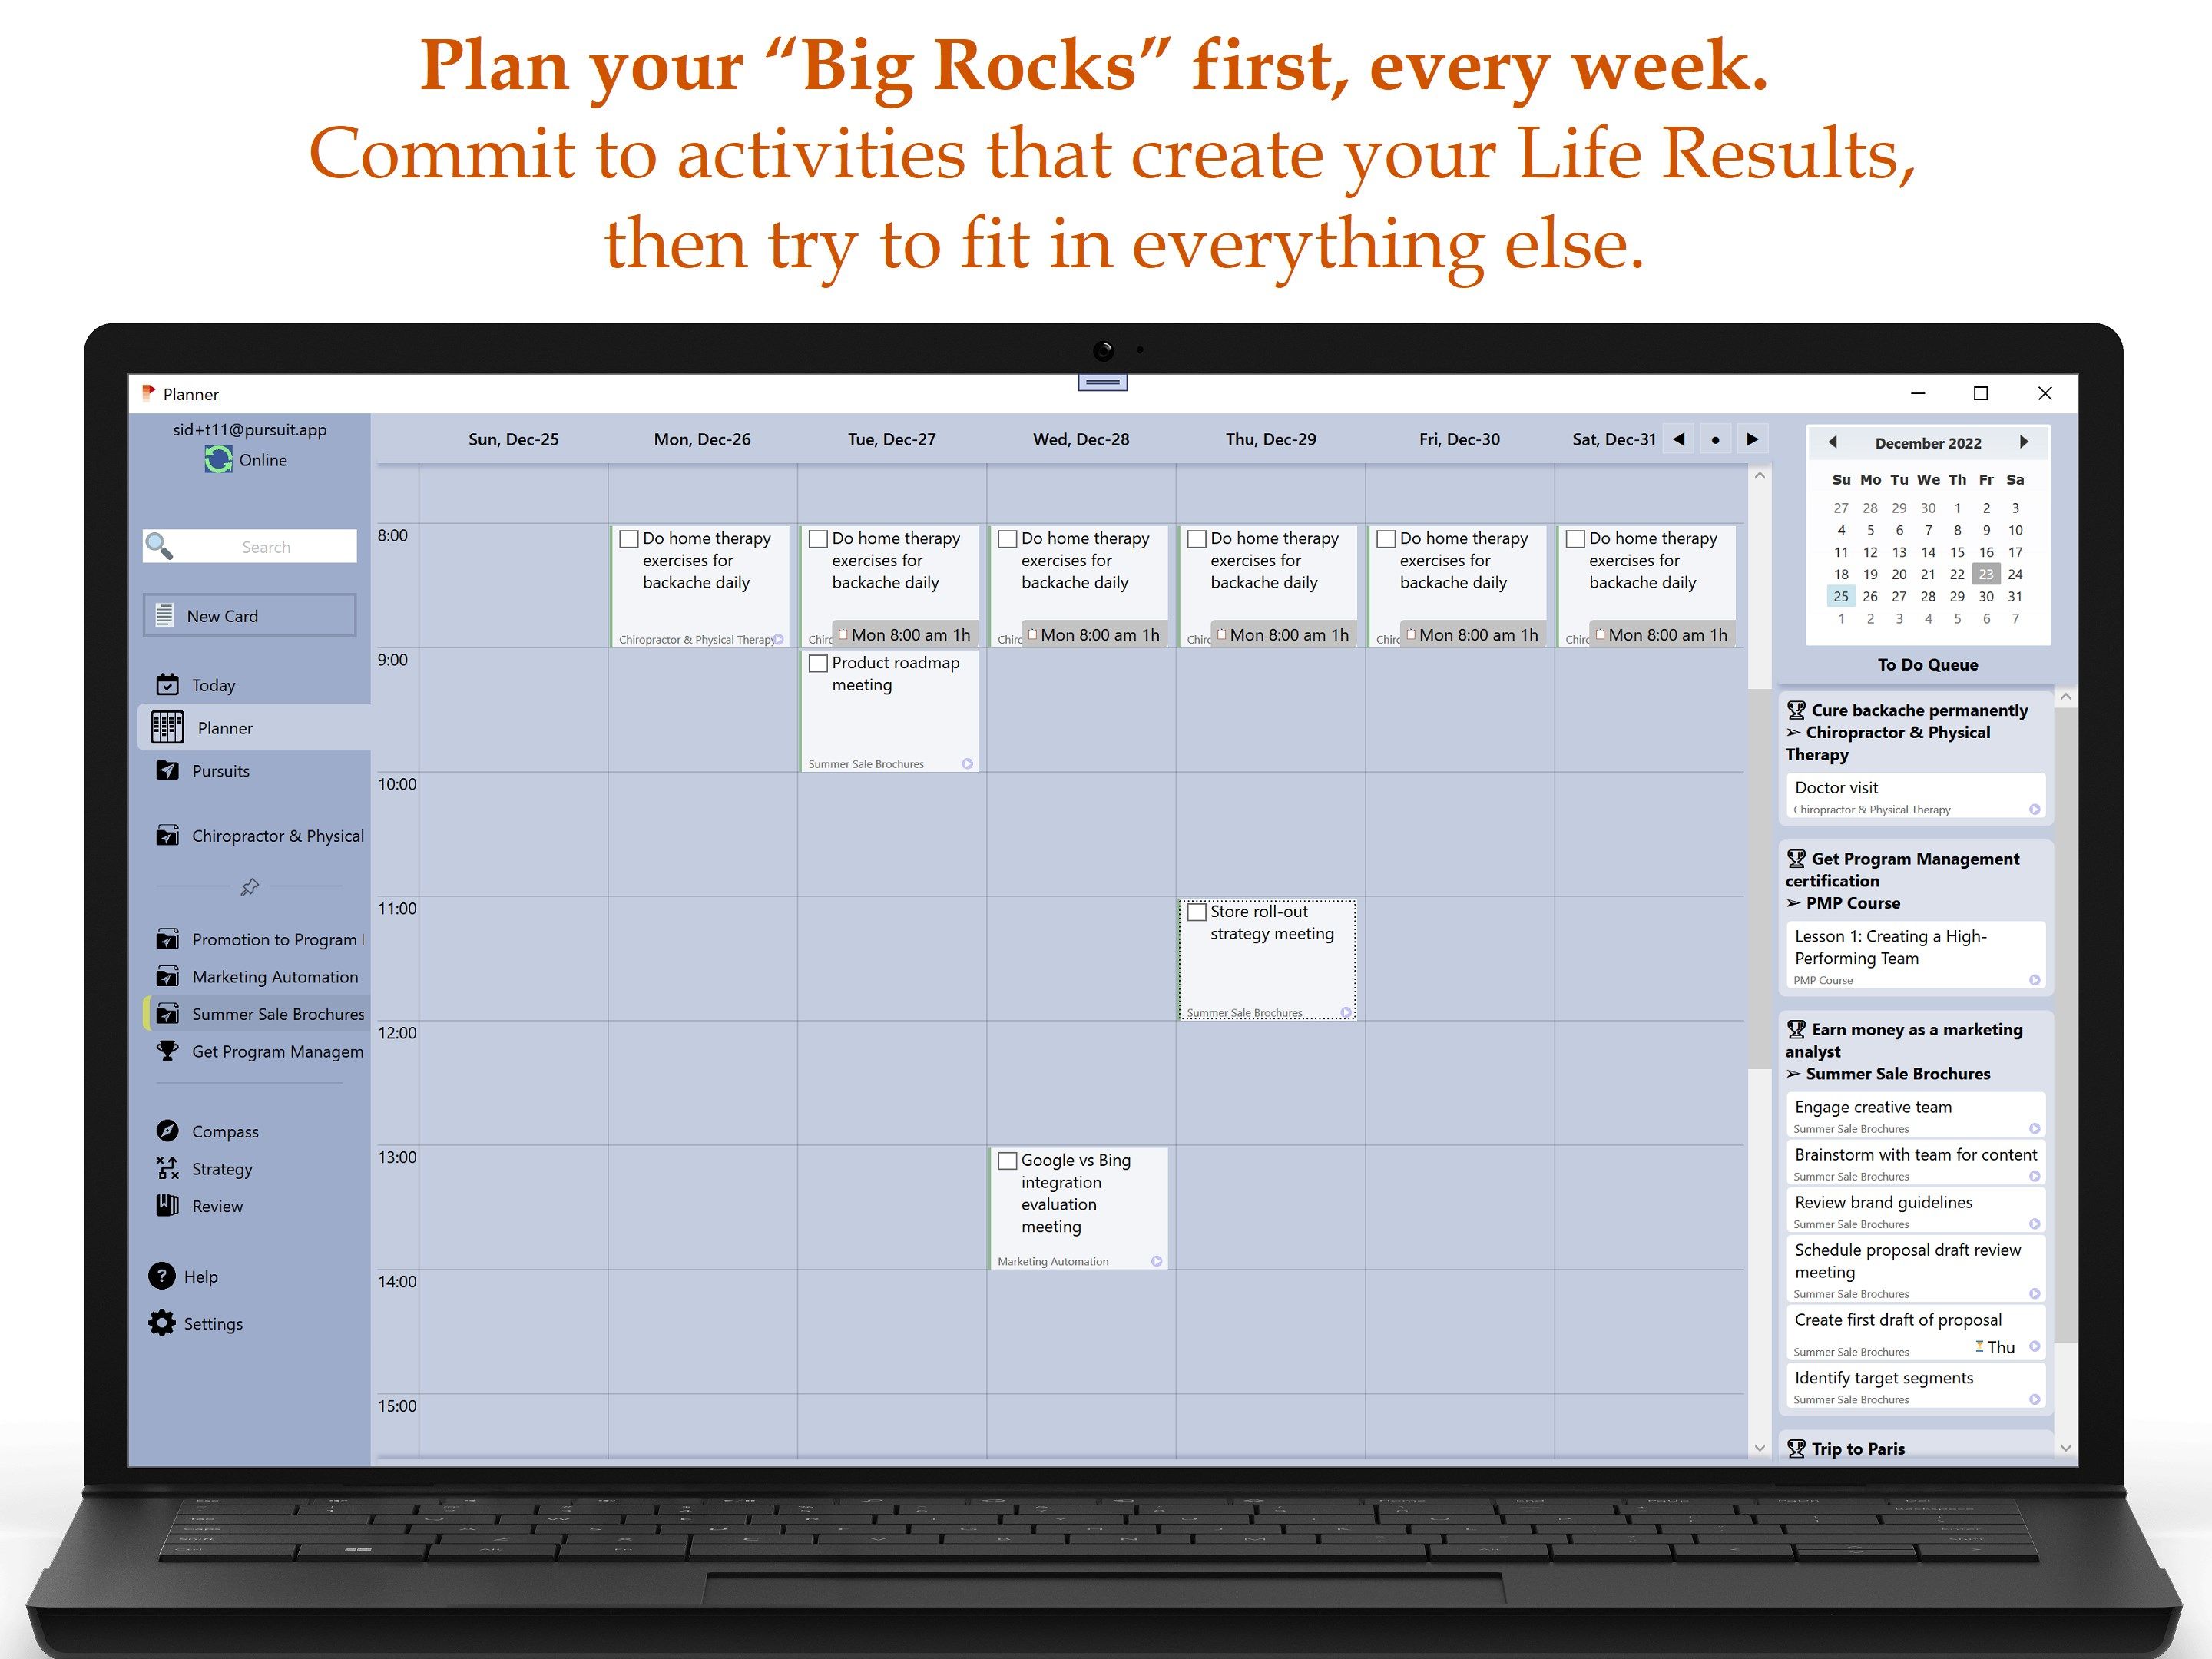 Plan your “Big Rocks” in first, every week: Commit to activities that create your Life Results, then try to fit in everything else.